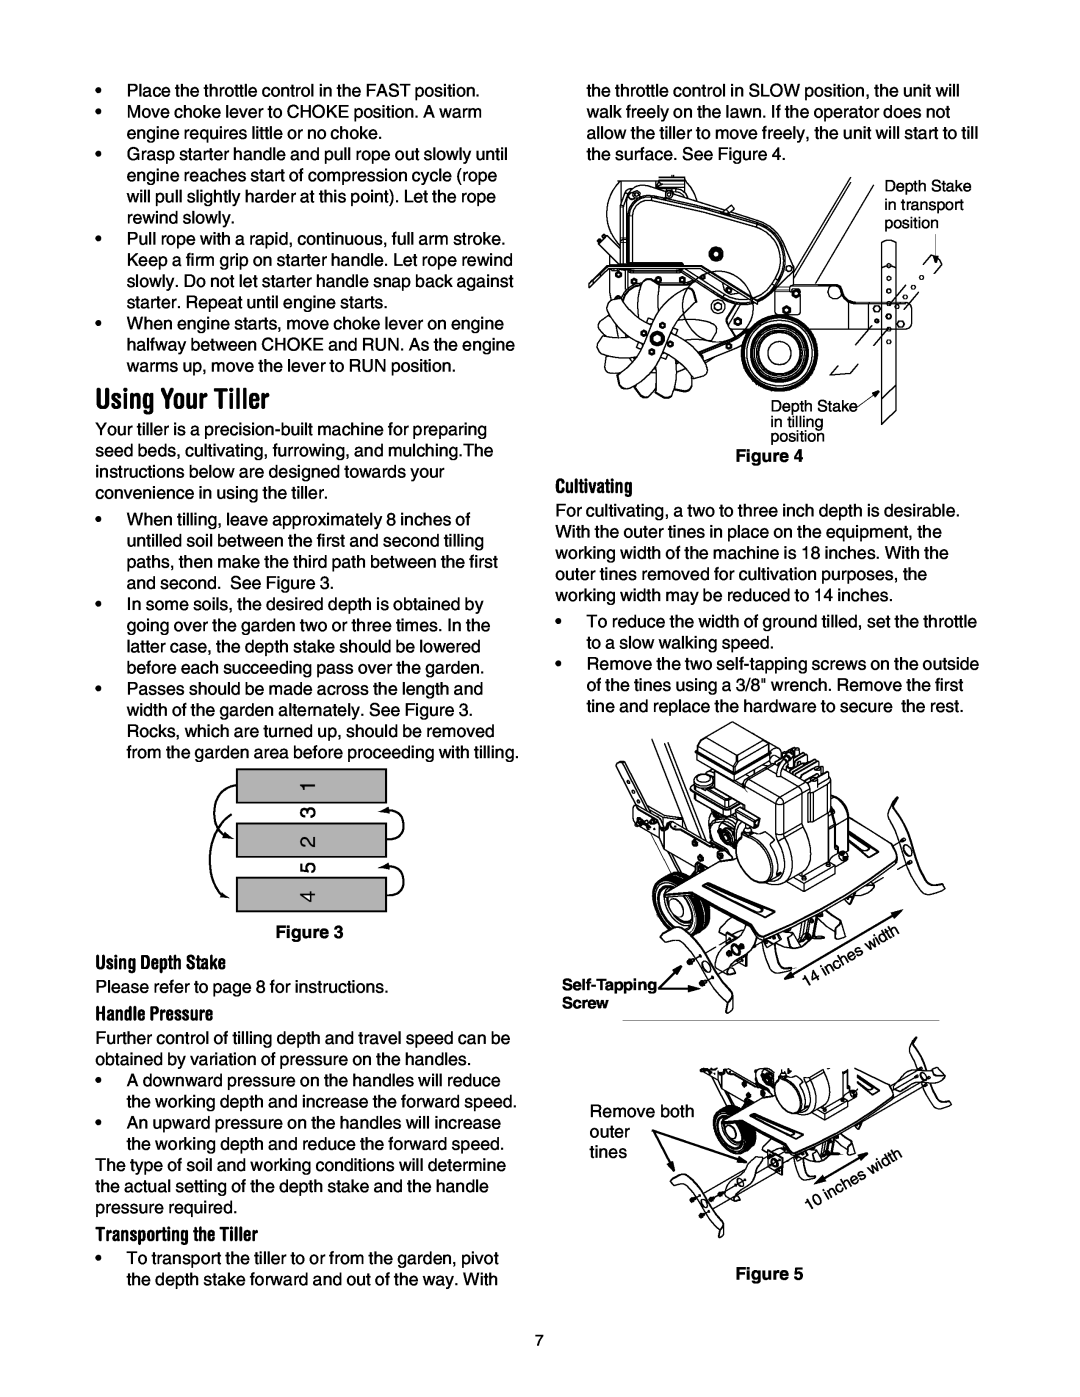 Yard Machines 30 manual Using Your Tiller, Cultivating, Using Depth Stake, Handle Pressure, Transporting the Tiller 